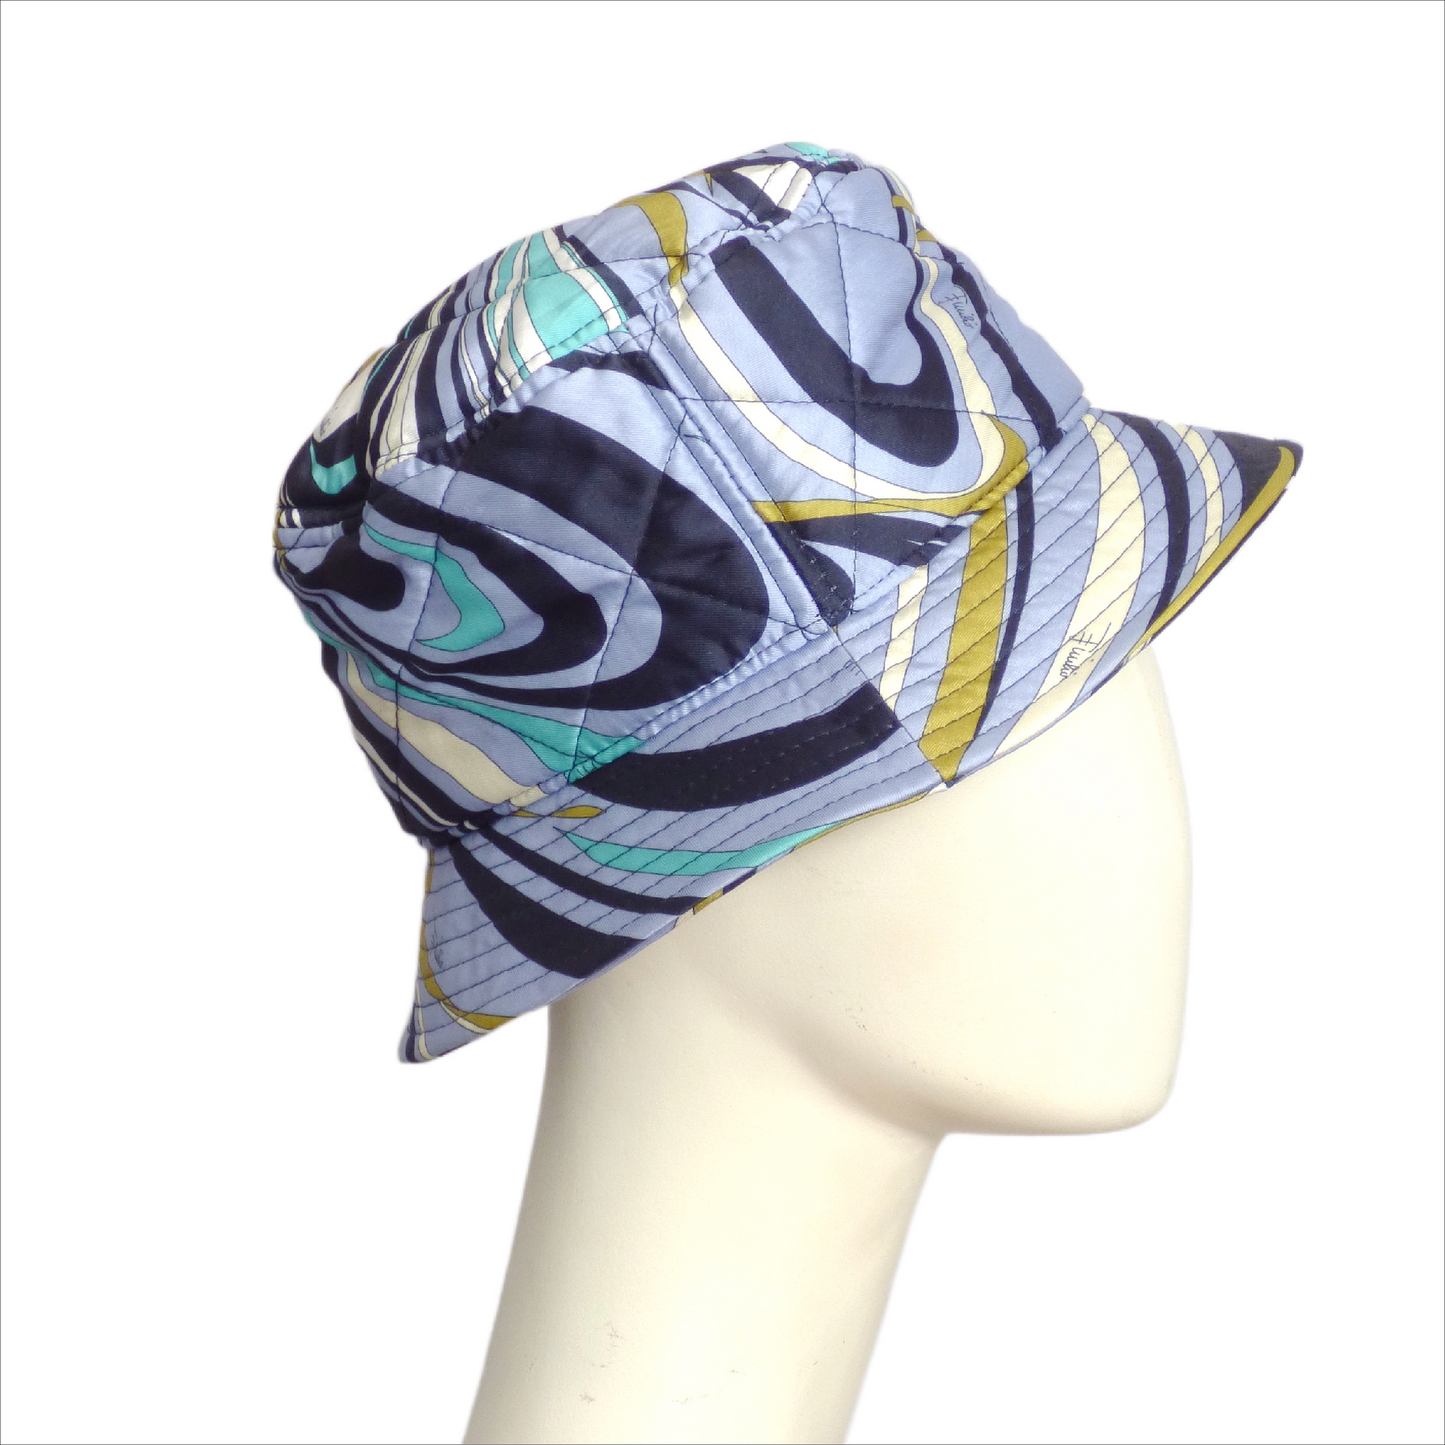 EMILIO PUCCI-NWT Printed Satin Bucket Hat, Size-Small